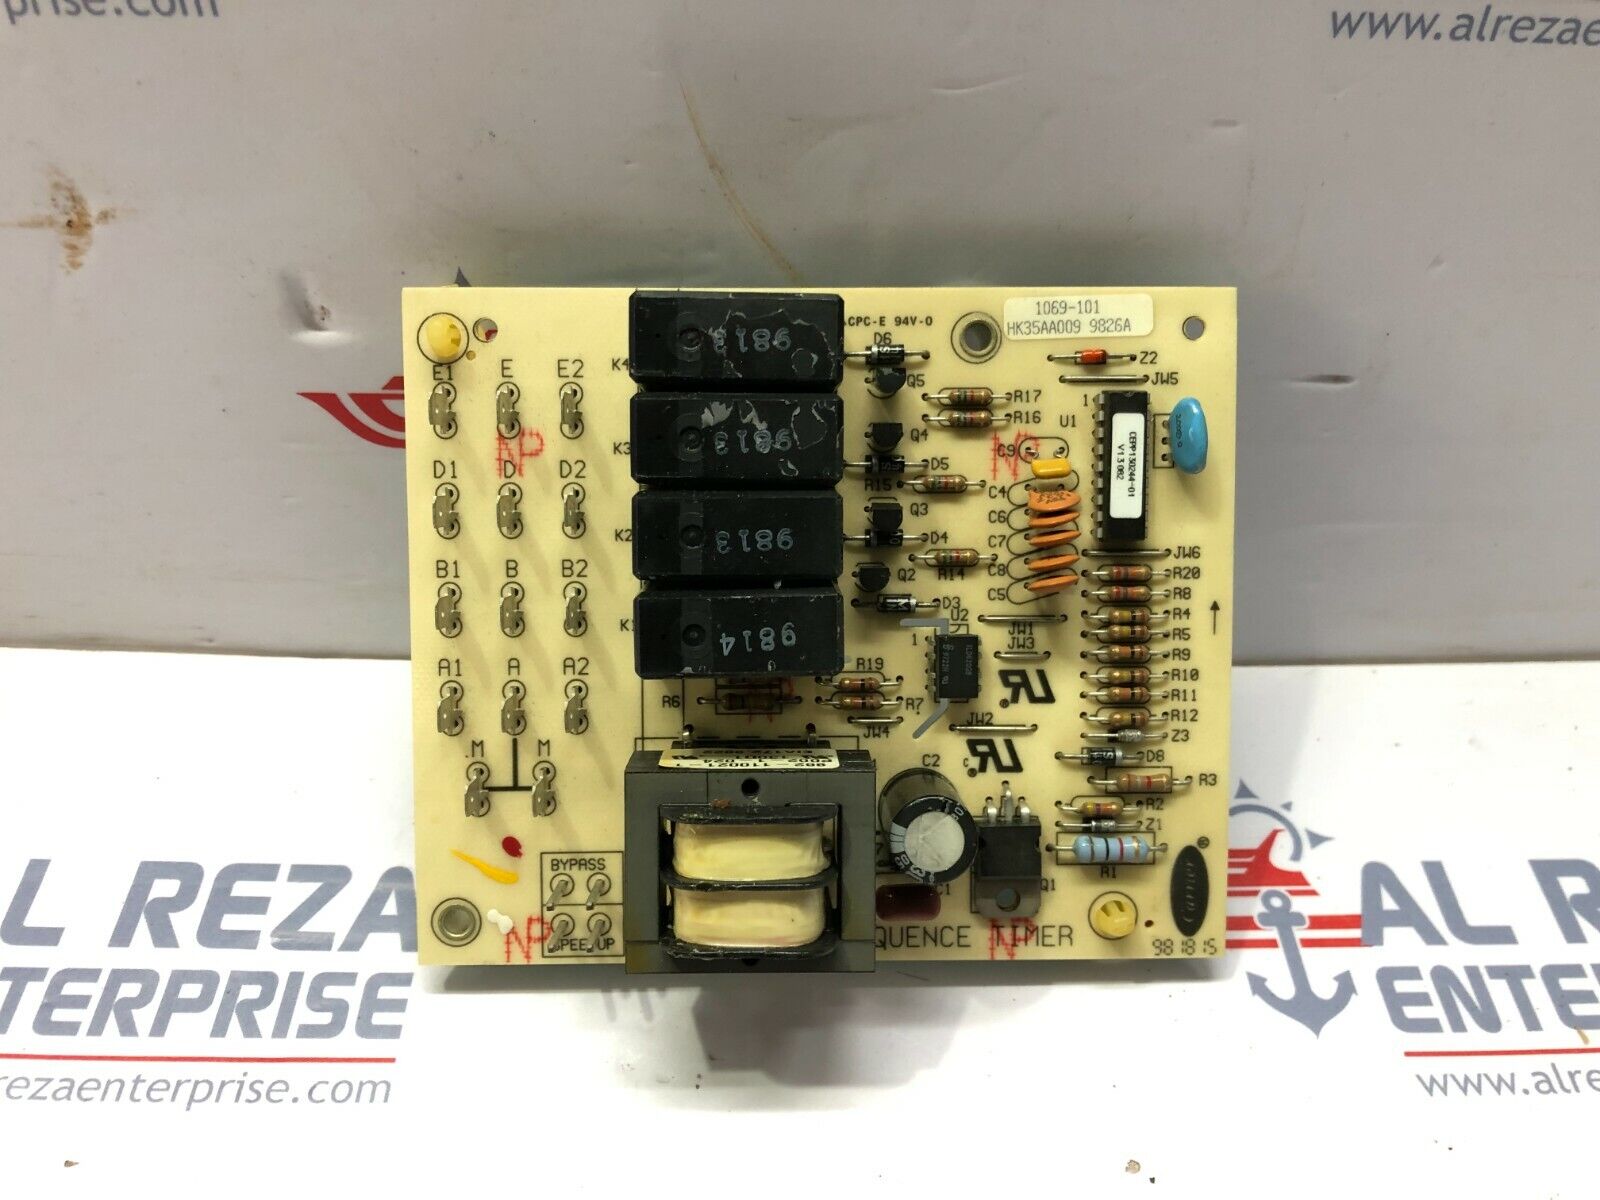 CARRIER HK35AA009 SEQUENCE TIMER 1069-83-102A